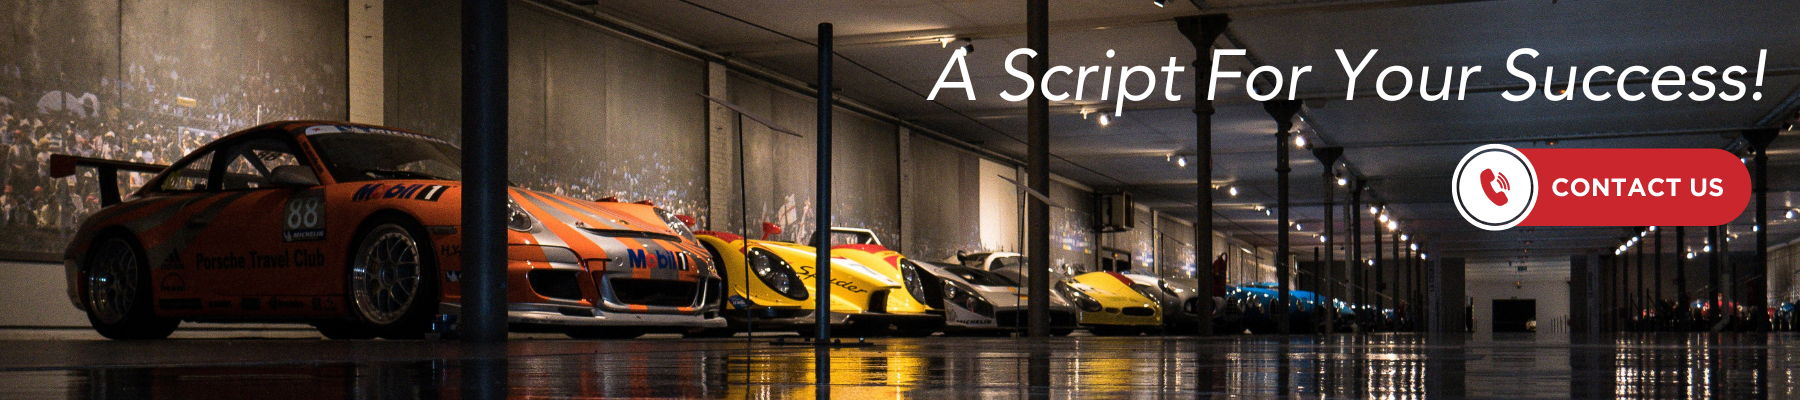 image of many cars in a row, with text that says A Script for Your Success. Click to contact us.